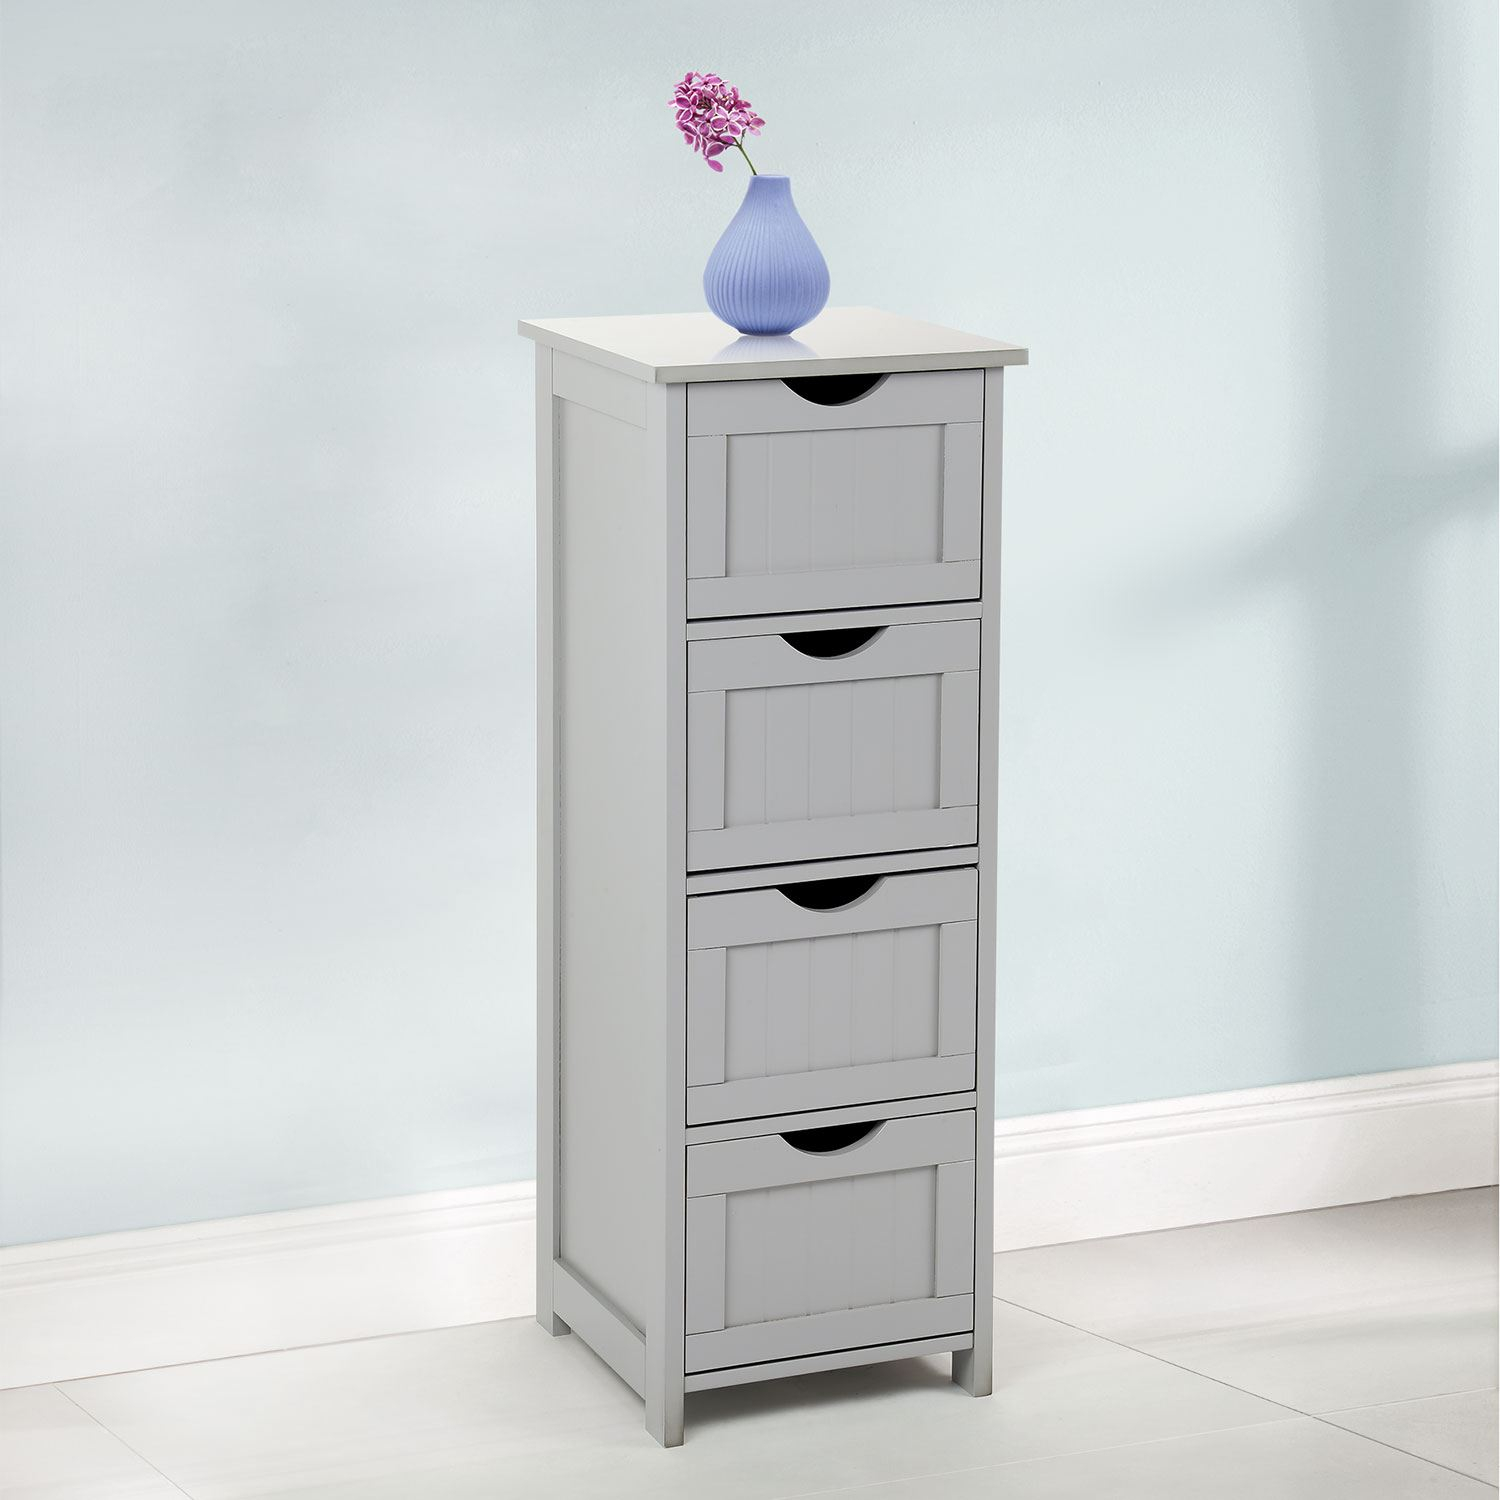 4 Drawer Slim Chest Tall Bathroom Storage Cabinet Bedroom Hallway pertaining to proportions 1500 X 1500